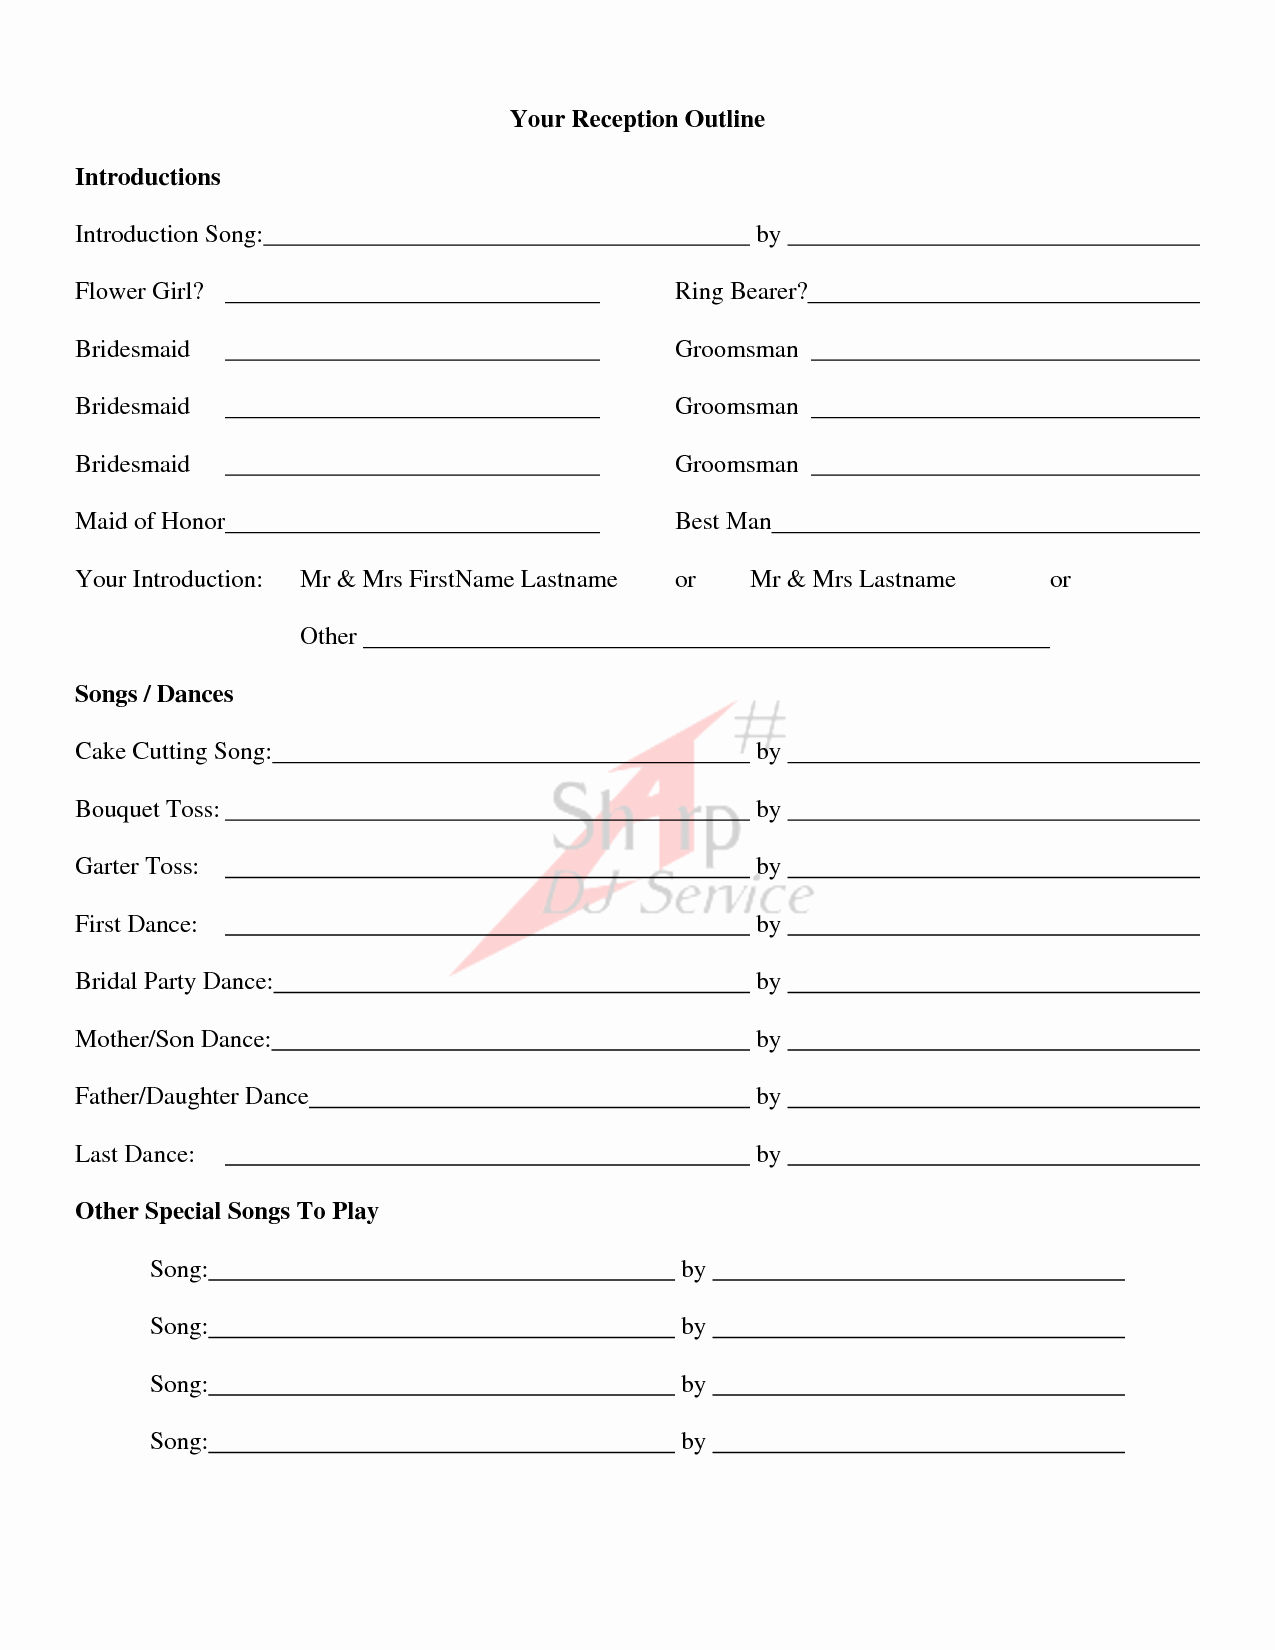 Wedding Ceremony song List Template Inspirational Wedding Ceremony Outline Examples